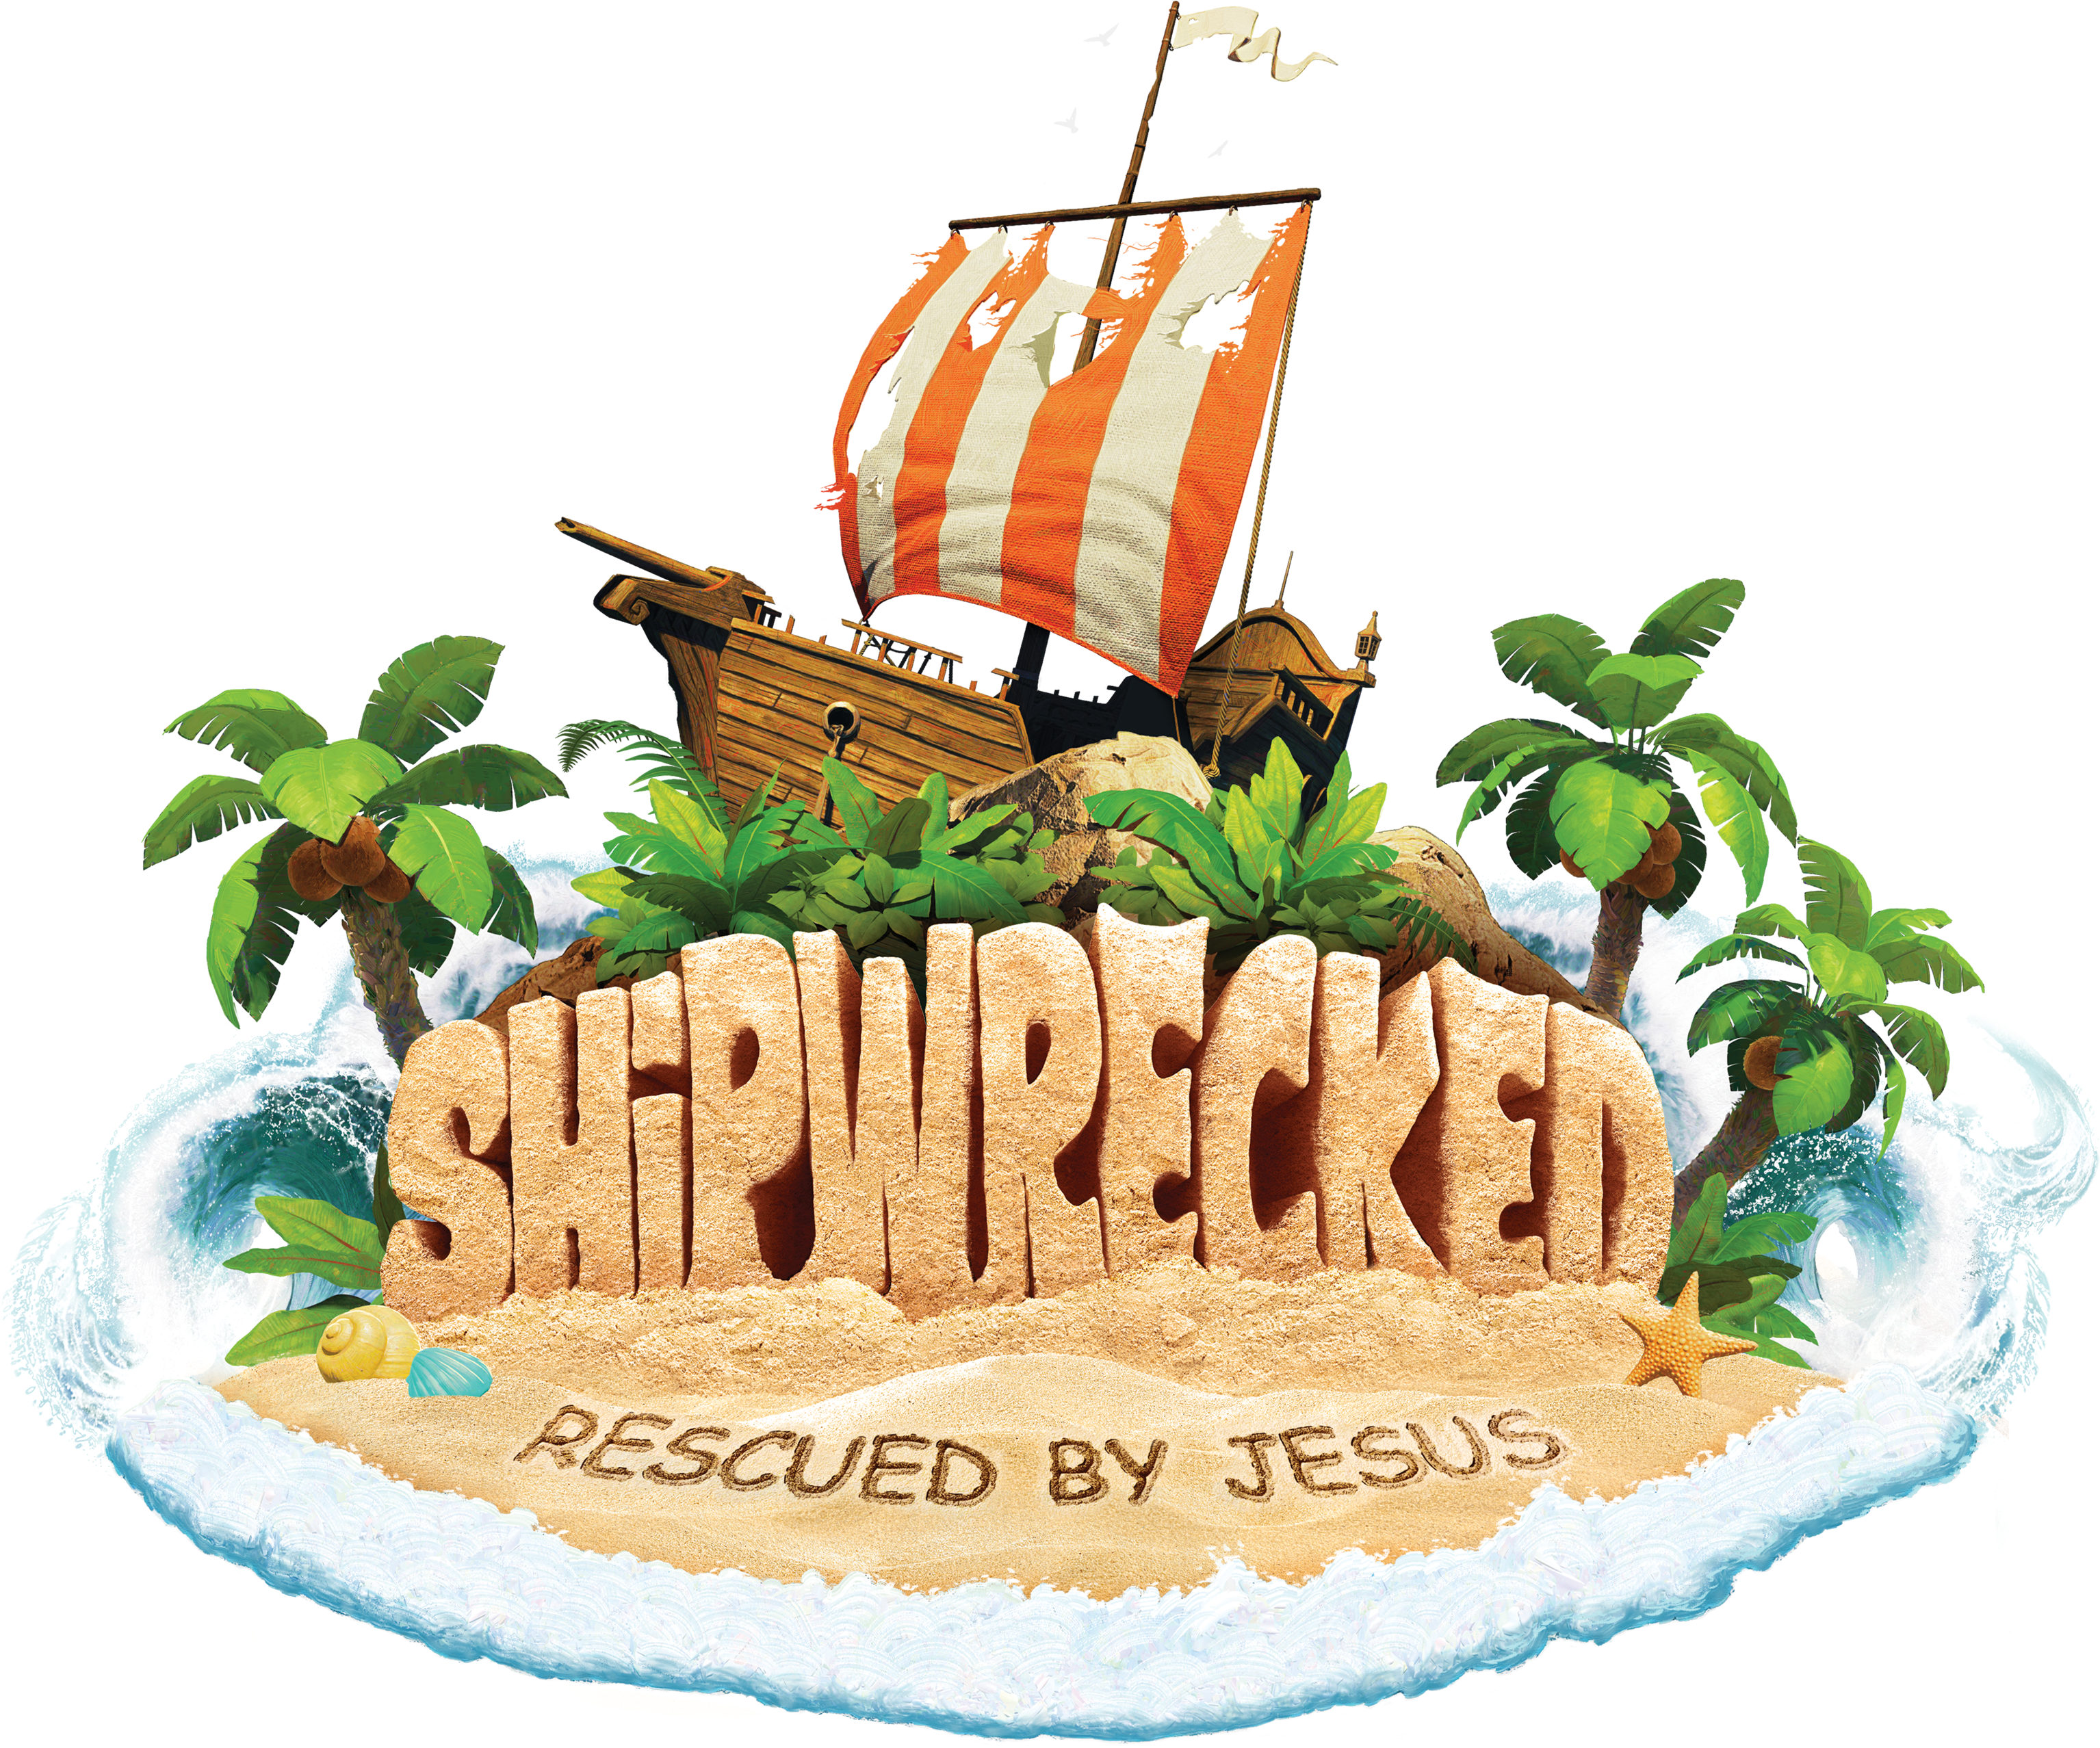 Vacation Bible School "shipwrecked" - Shipwrecked Vbs Ultimate Starter Kit (3240x3240)